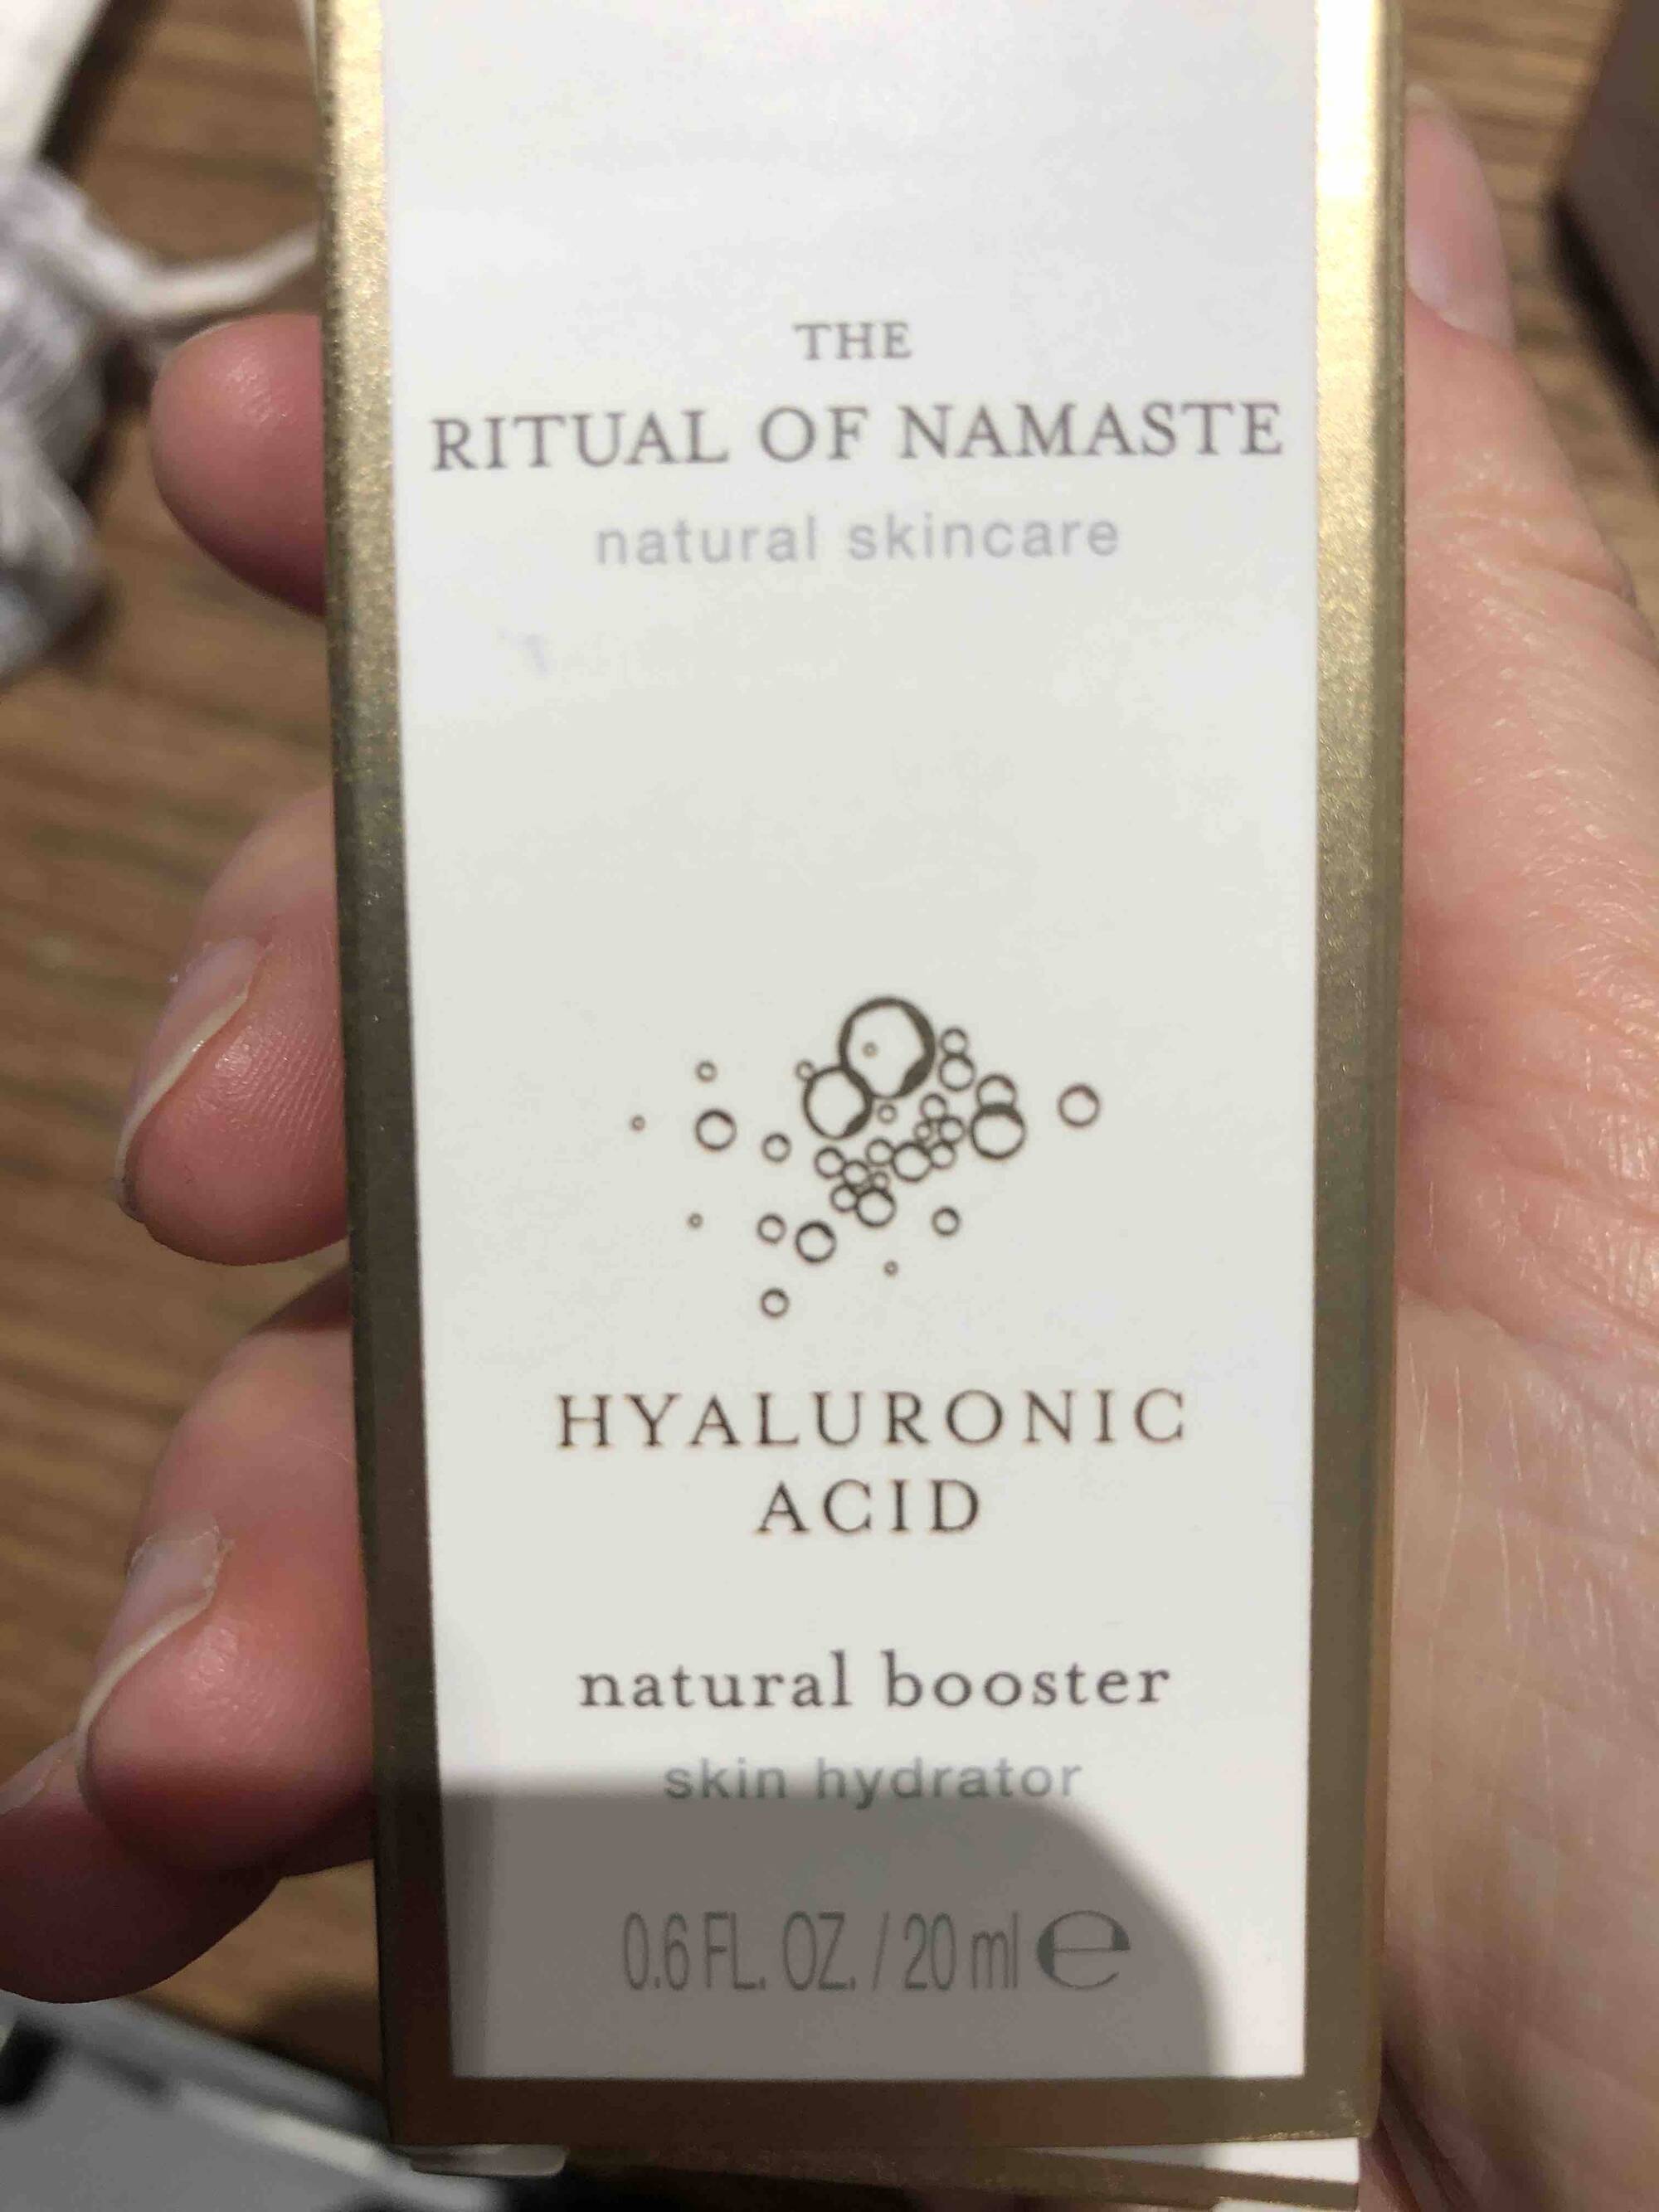 THE RITUAL OF NAMASTÉ - Hyaluronic acid - Natural booster skin hydrator